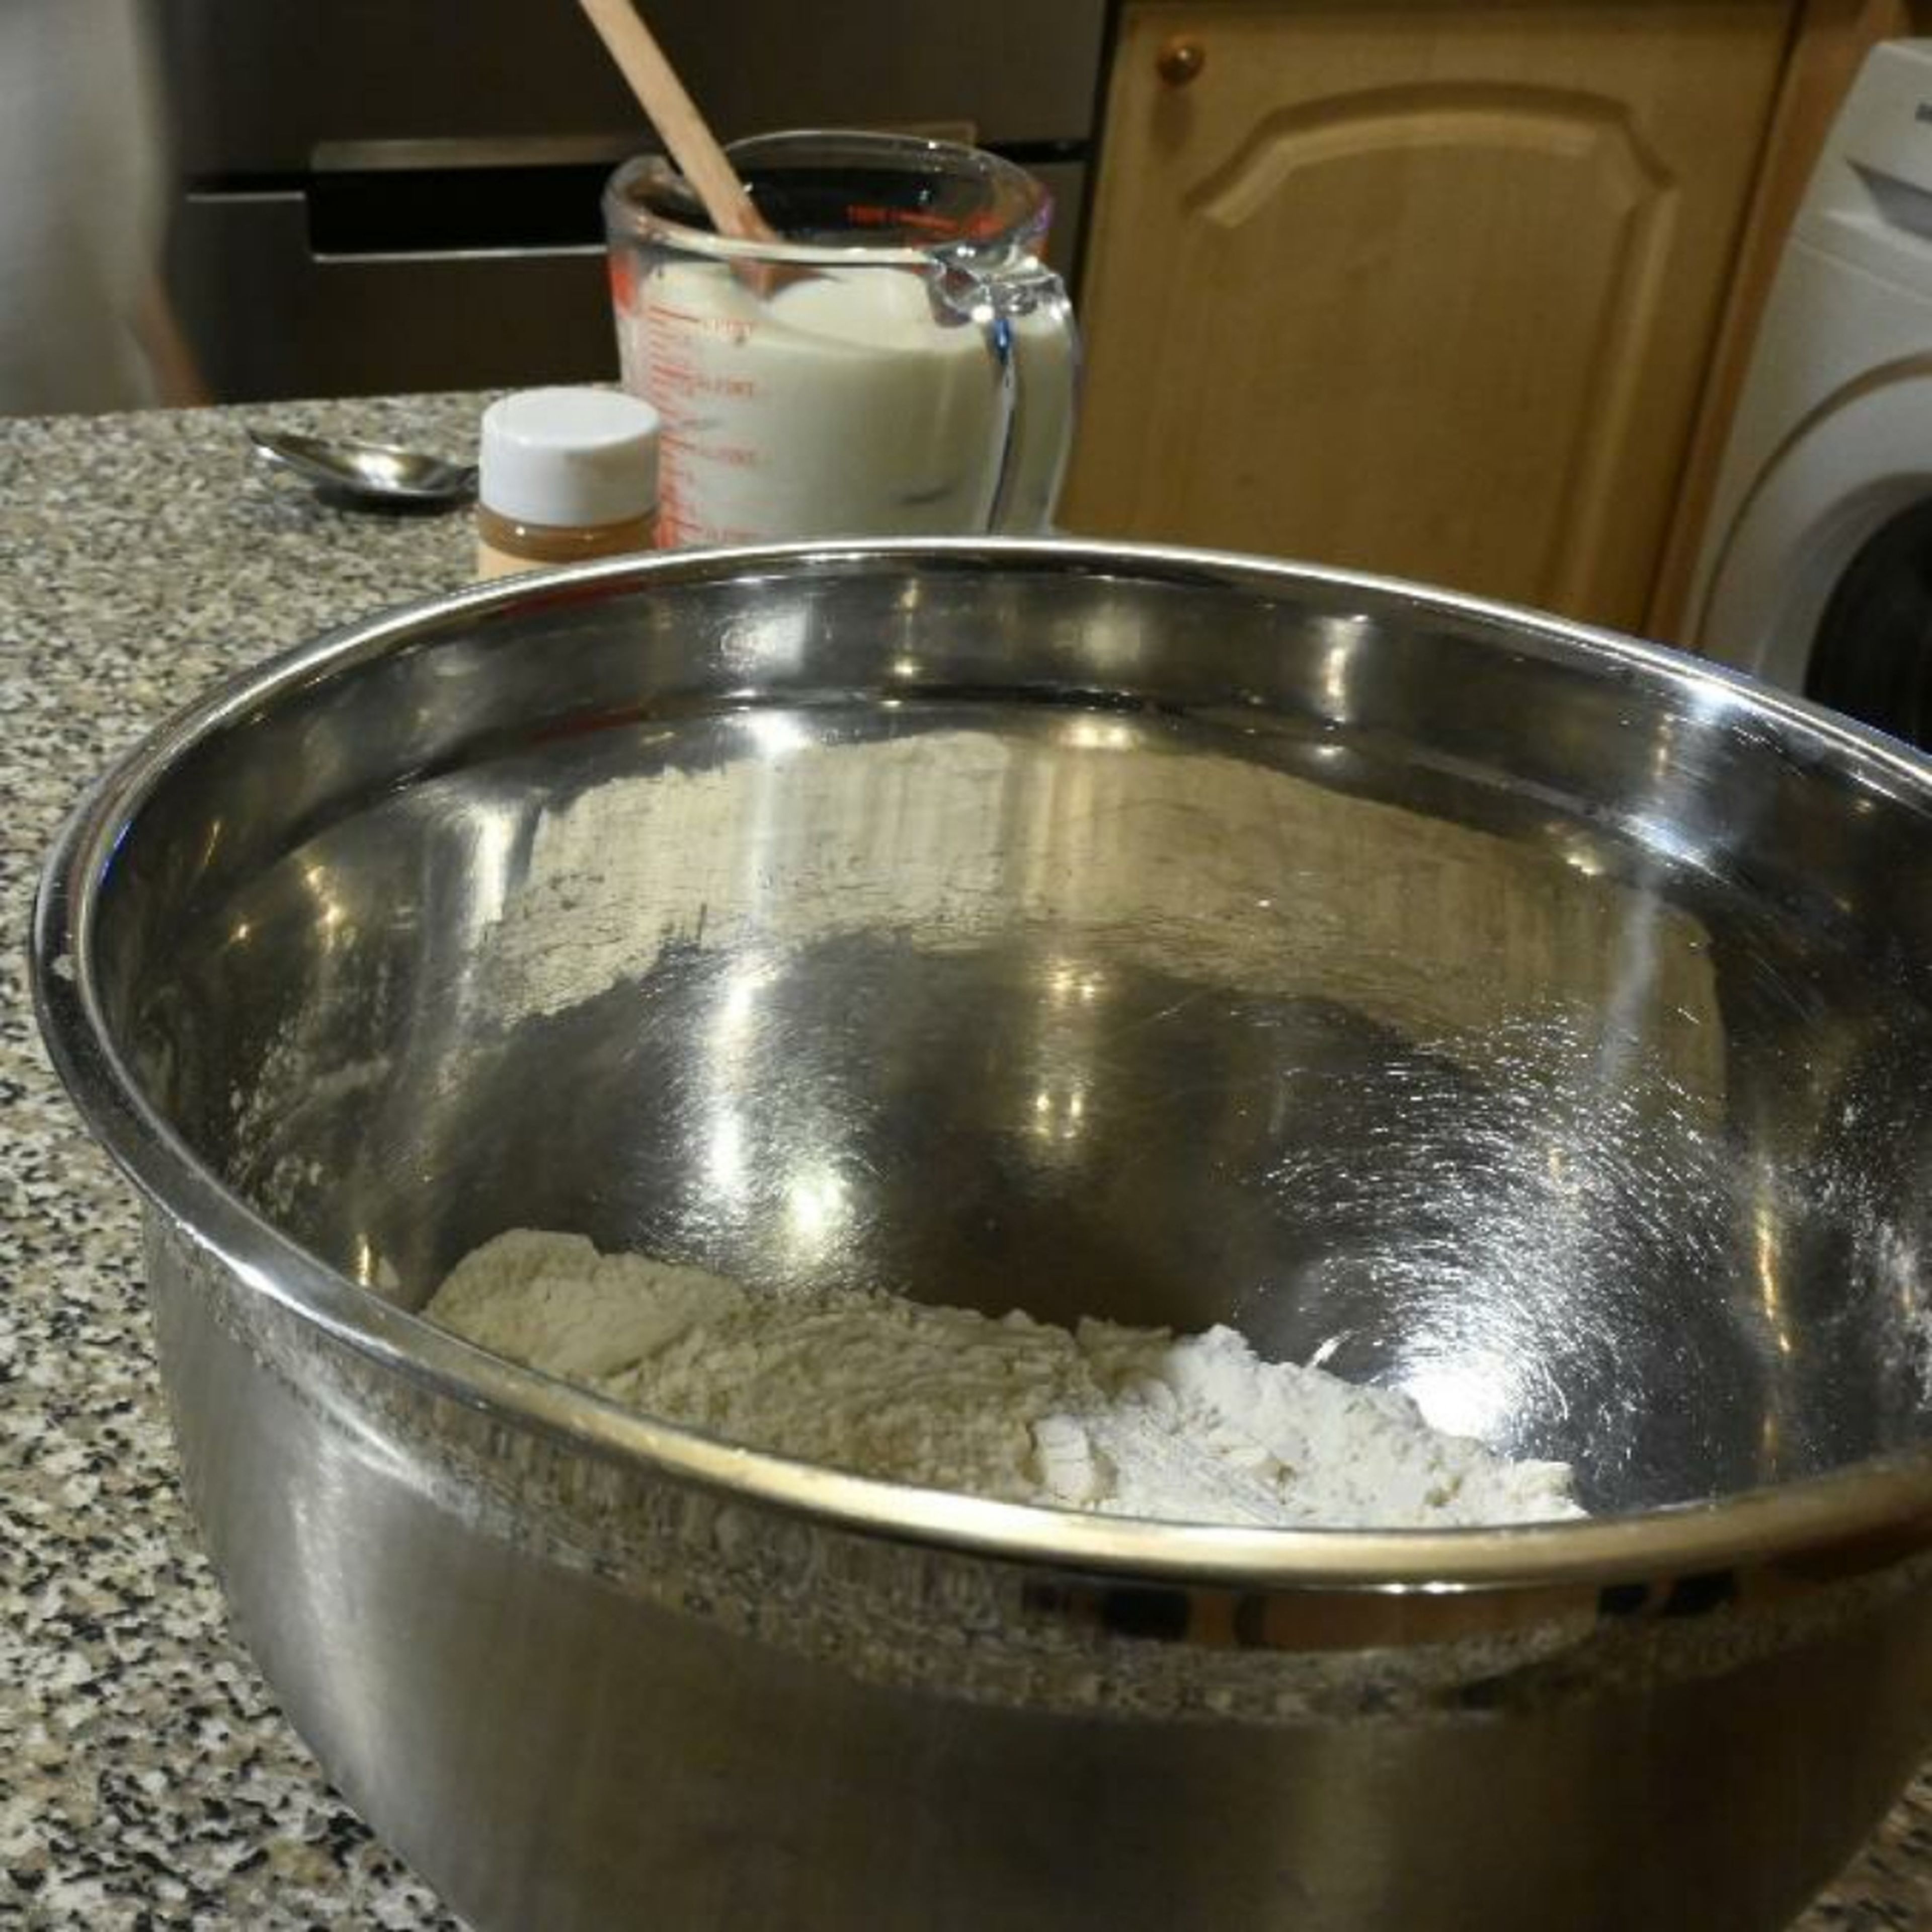 In a bowl, whisk together flour, baking powder and salt. In a separate small bowl, whisk together milk and maple syrup.